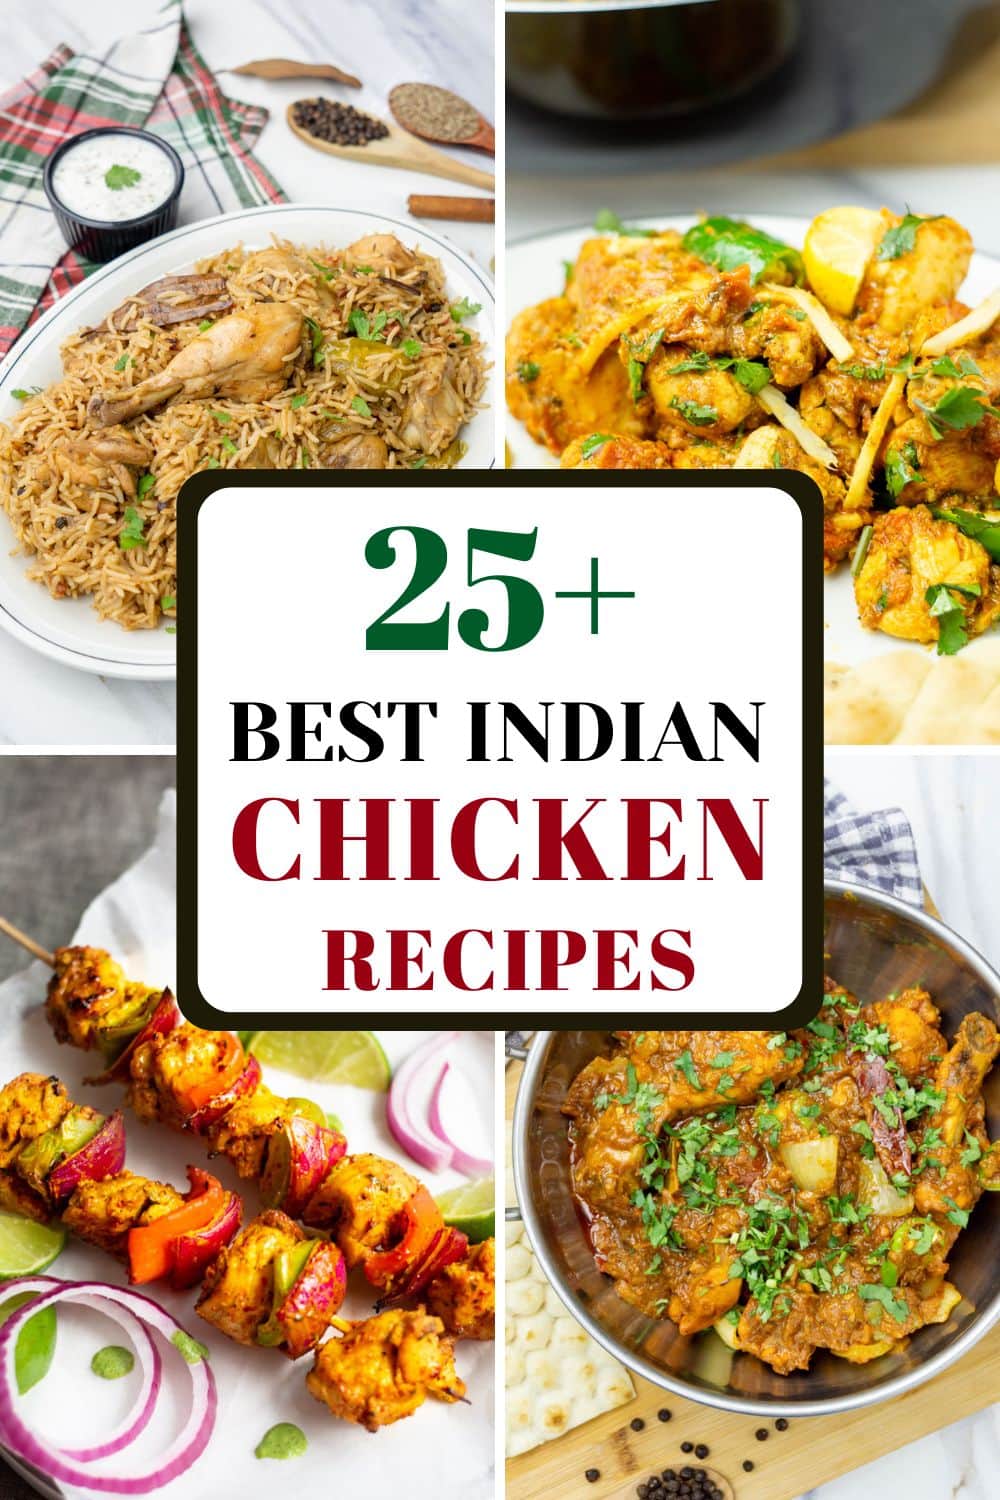 25 Best Indian Chicken Recipes including curries, rice, and appetizers.